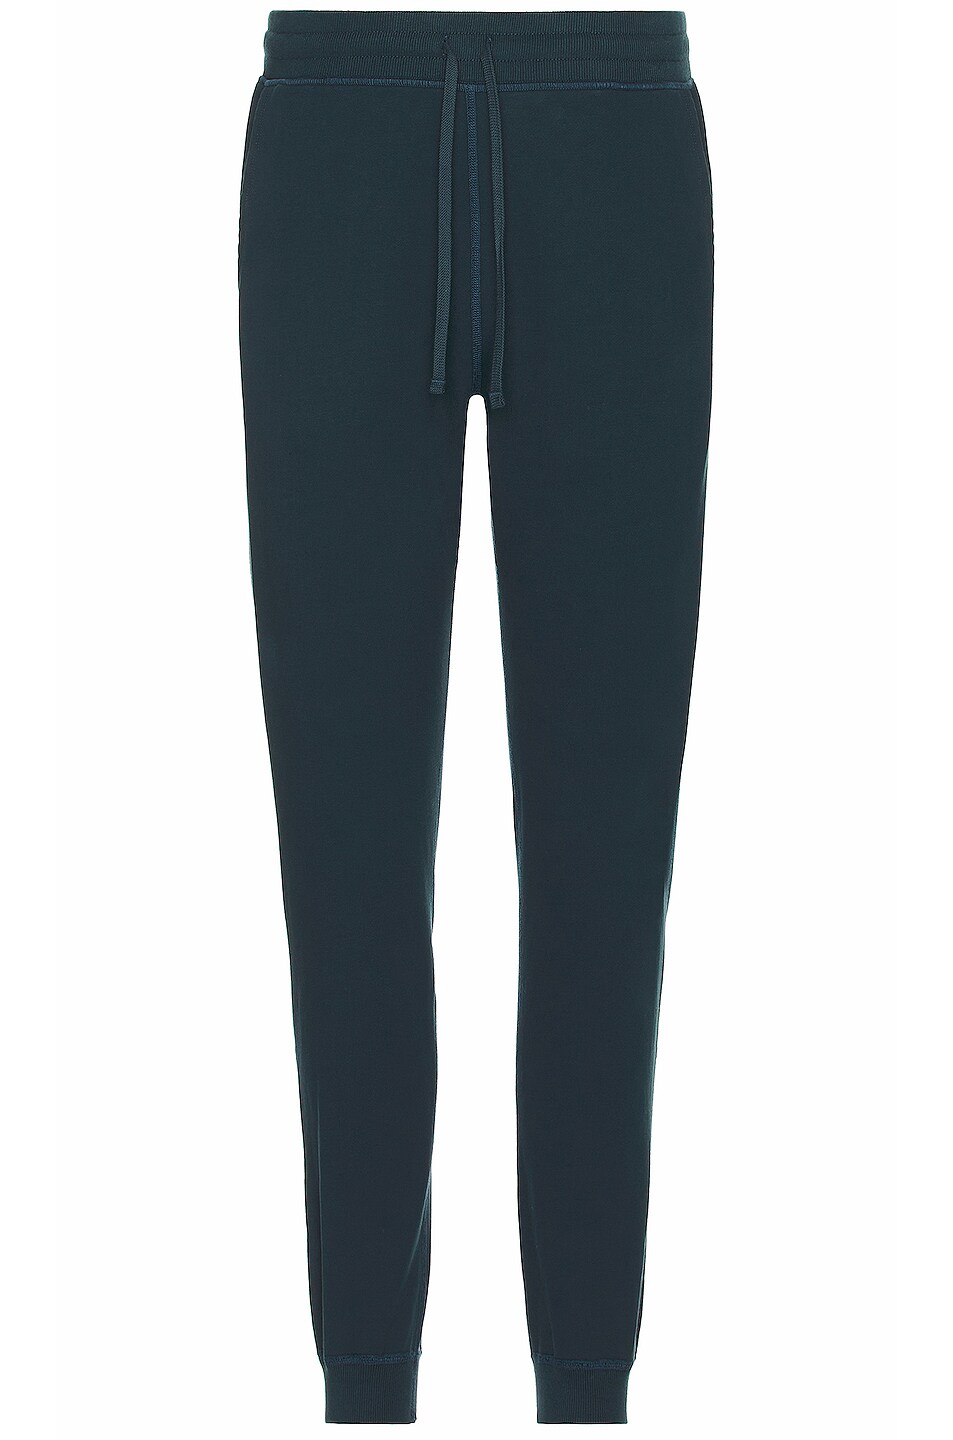 Image 1 of Reigning Champ Slim Sweatpant Midweight Terry in Deep Teal